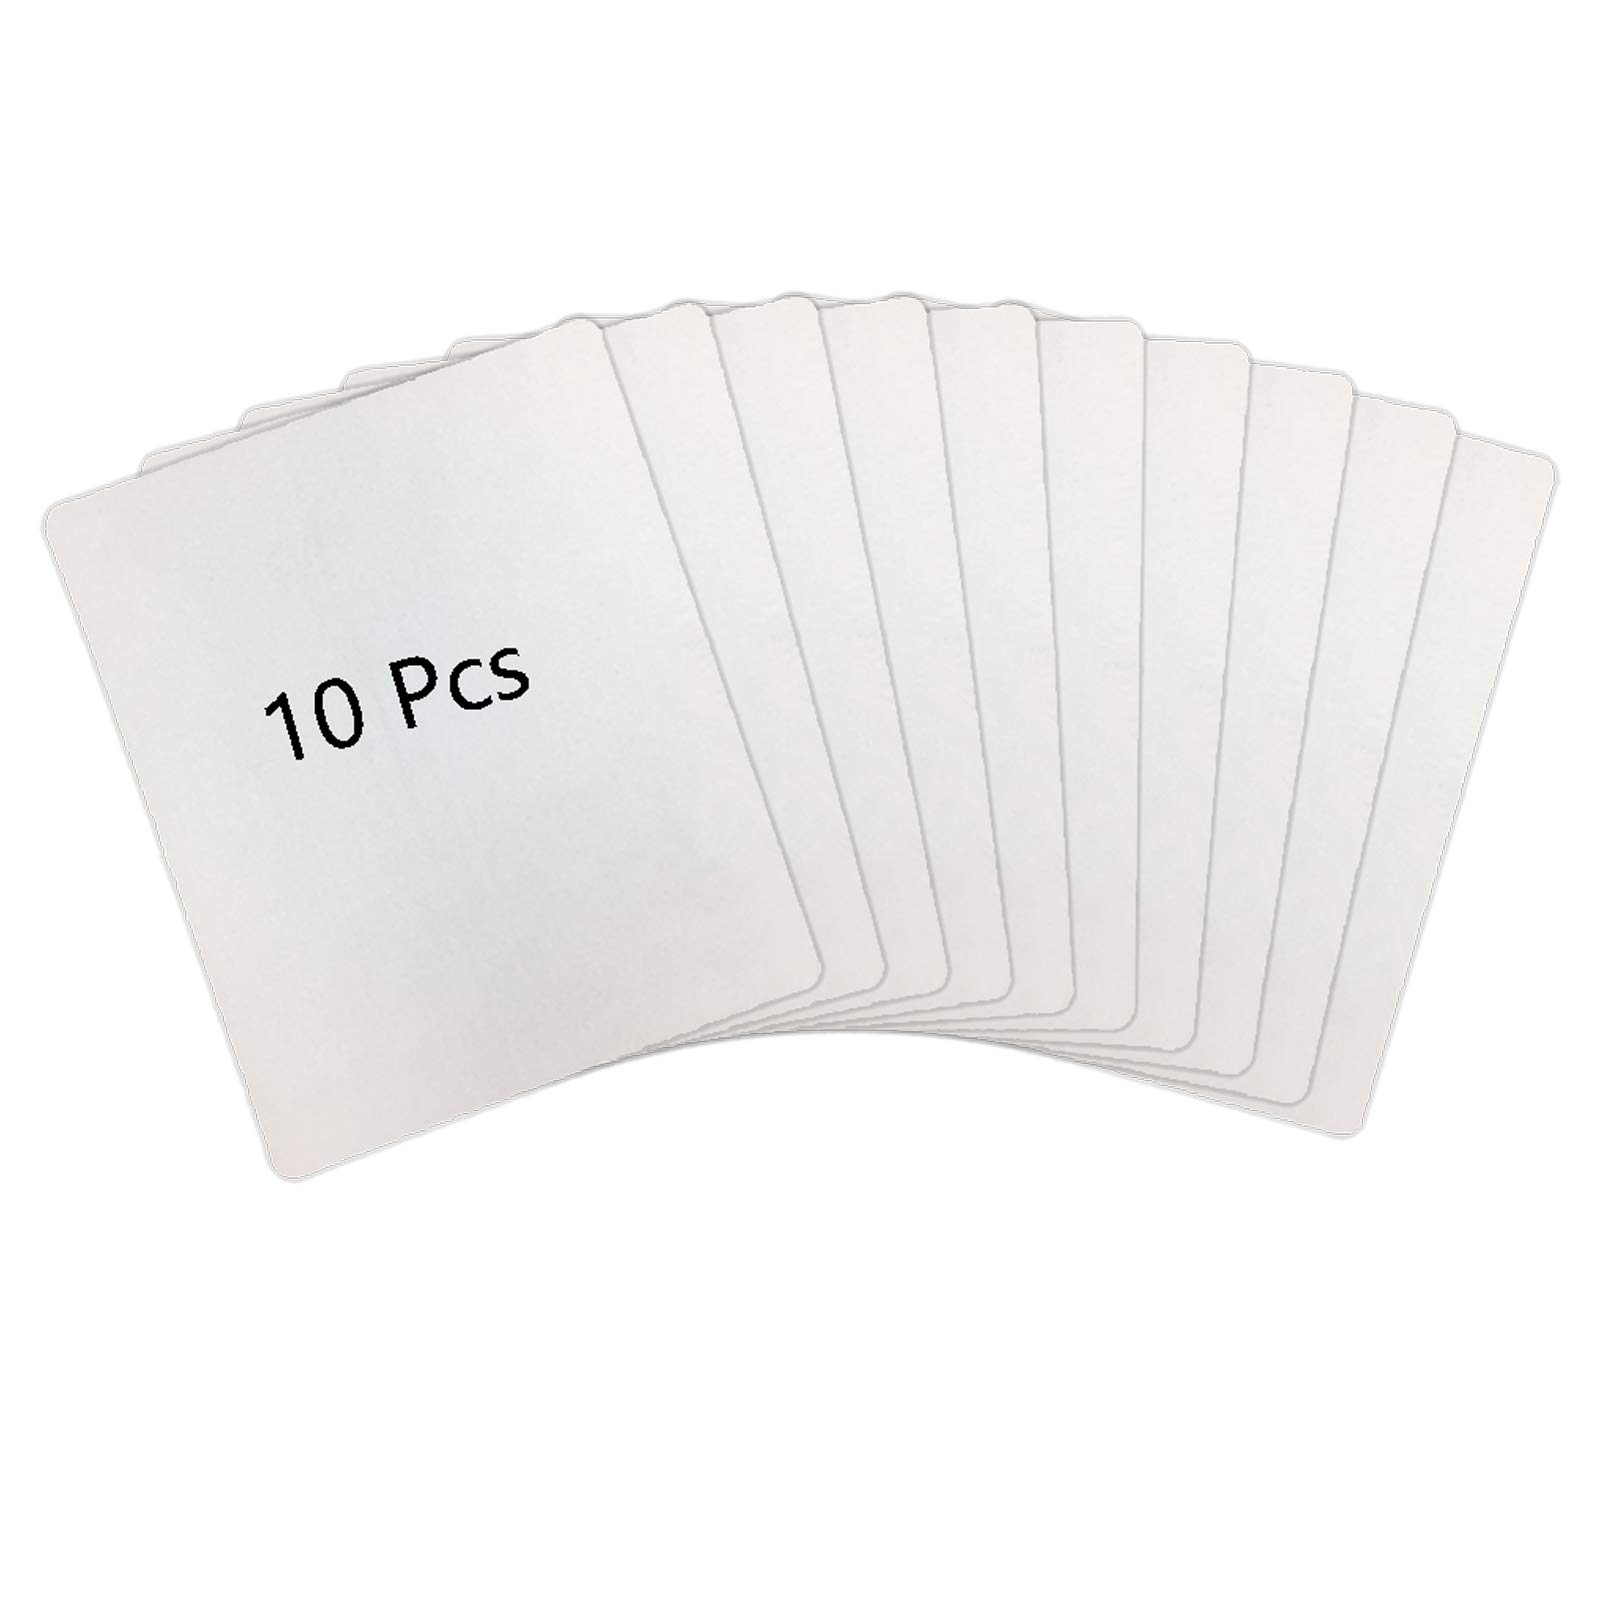 Sublimation Blank Mouse Pads for Heat Press, 10pcs 9.4 x 7.9 x0.12 Blanks  Rectangular Mousepads, Sublimation Blank for Heat Press Printing White Blank  Mouse Pads